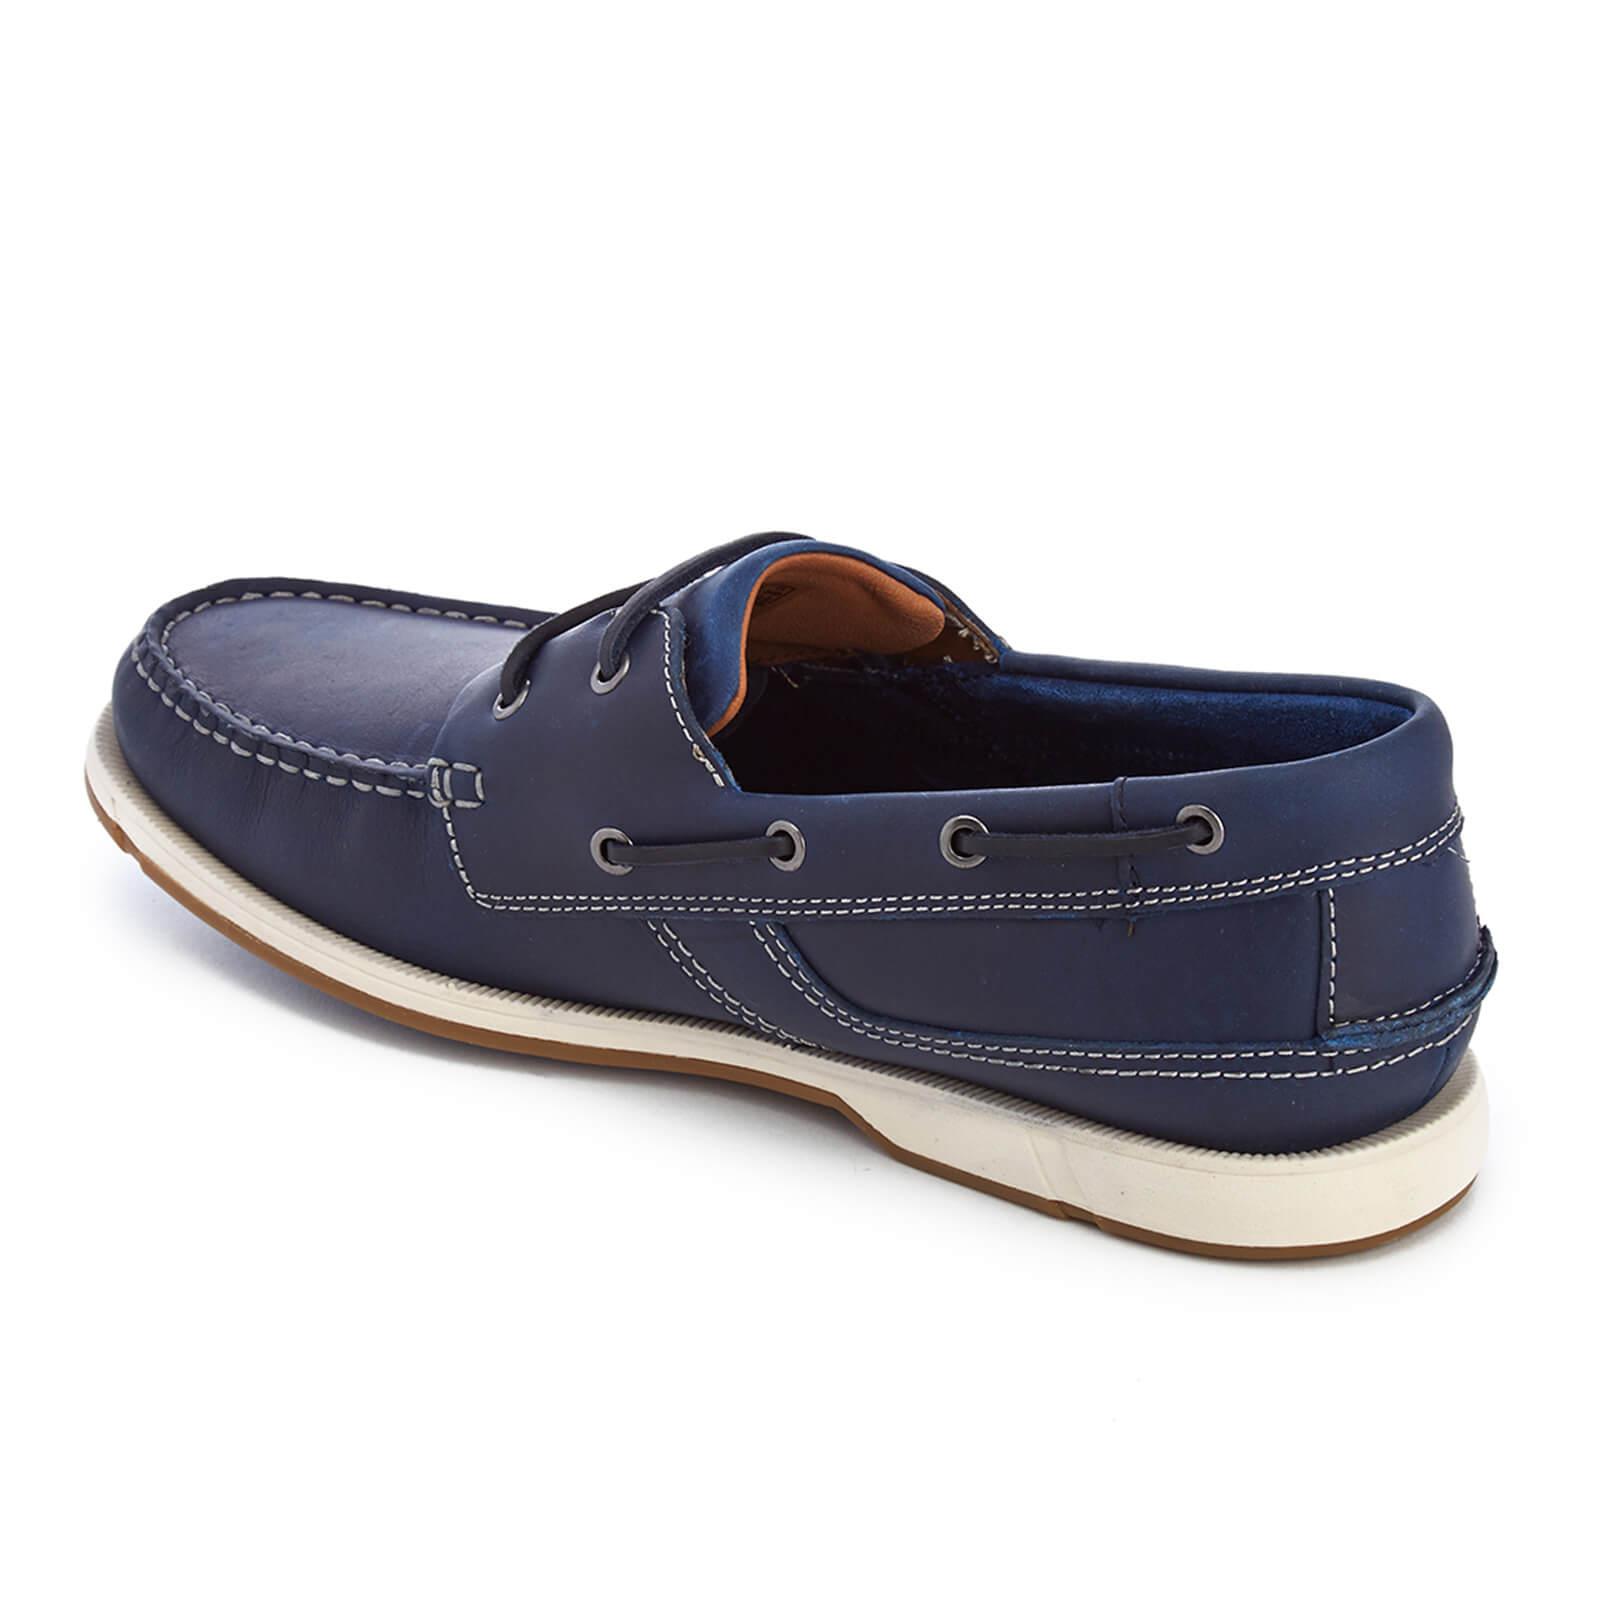 Clarks Fulmen Row Leather Boat Shoes in Blue for Men - Lyst